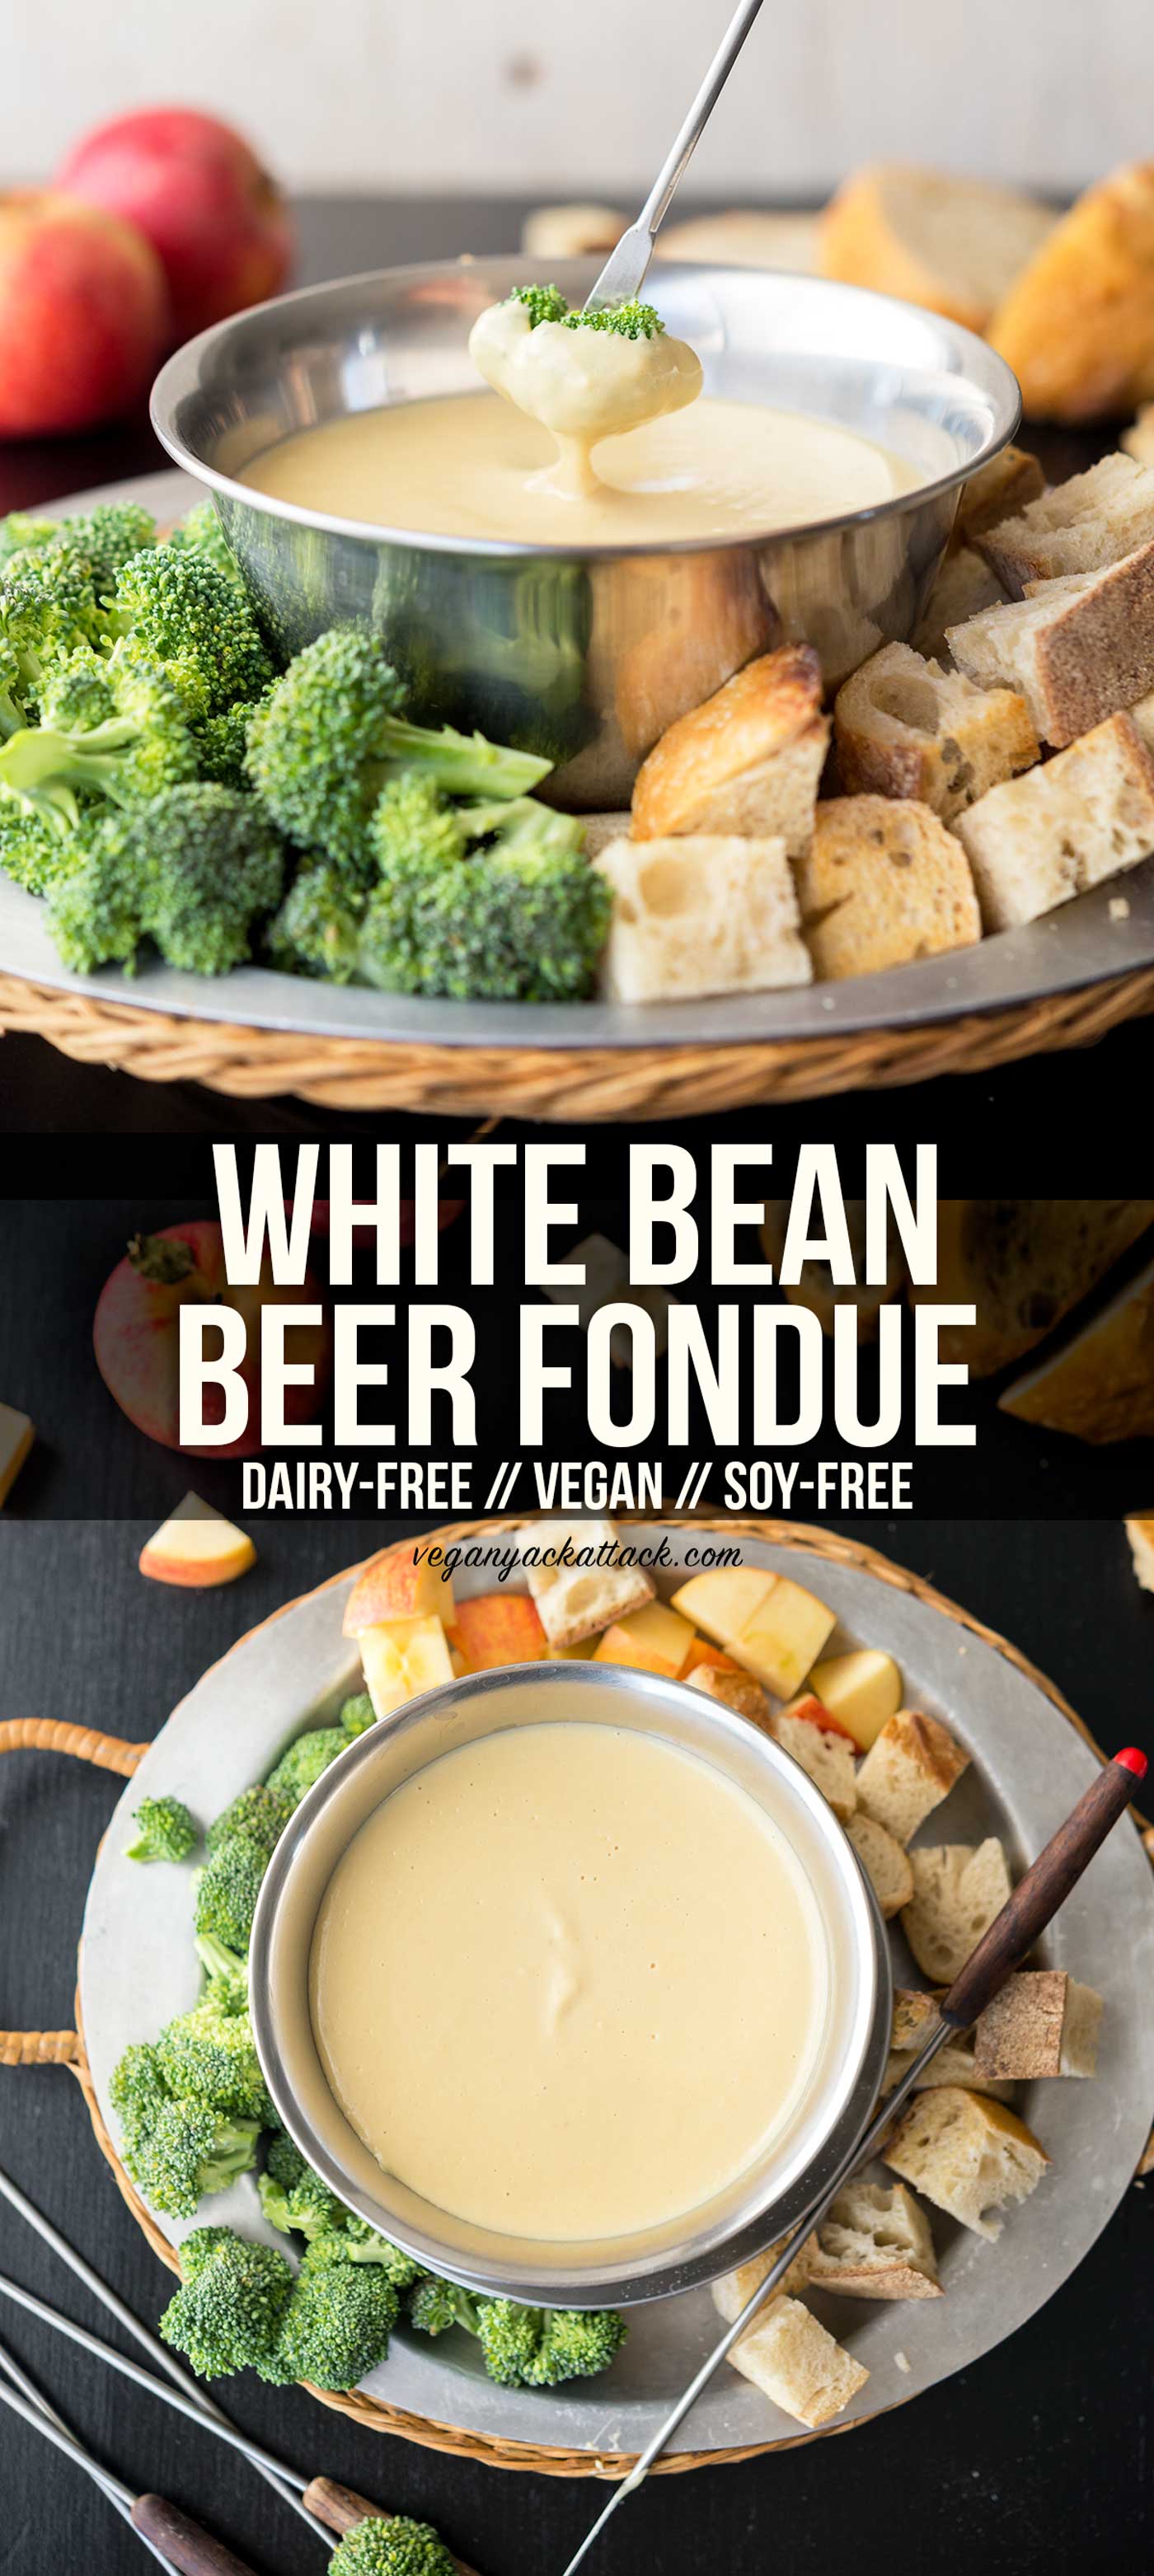 White bean beer fondue makes for a fun appetizer to be shared among friends, whether for a dinner party or a game night! This creamy, low-fat, fondue is a delicious crowd-pleaser, especially with its beer-tinged aroma. #veganbowlattack #vegan #soyfree #dairyfree #appetizer